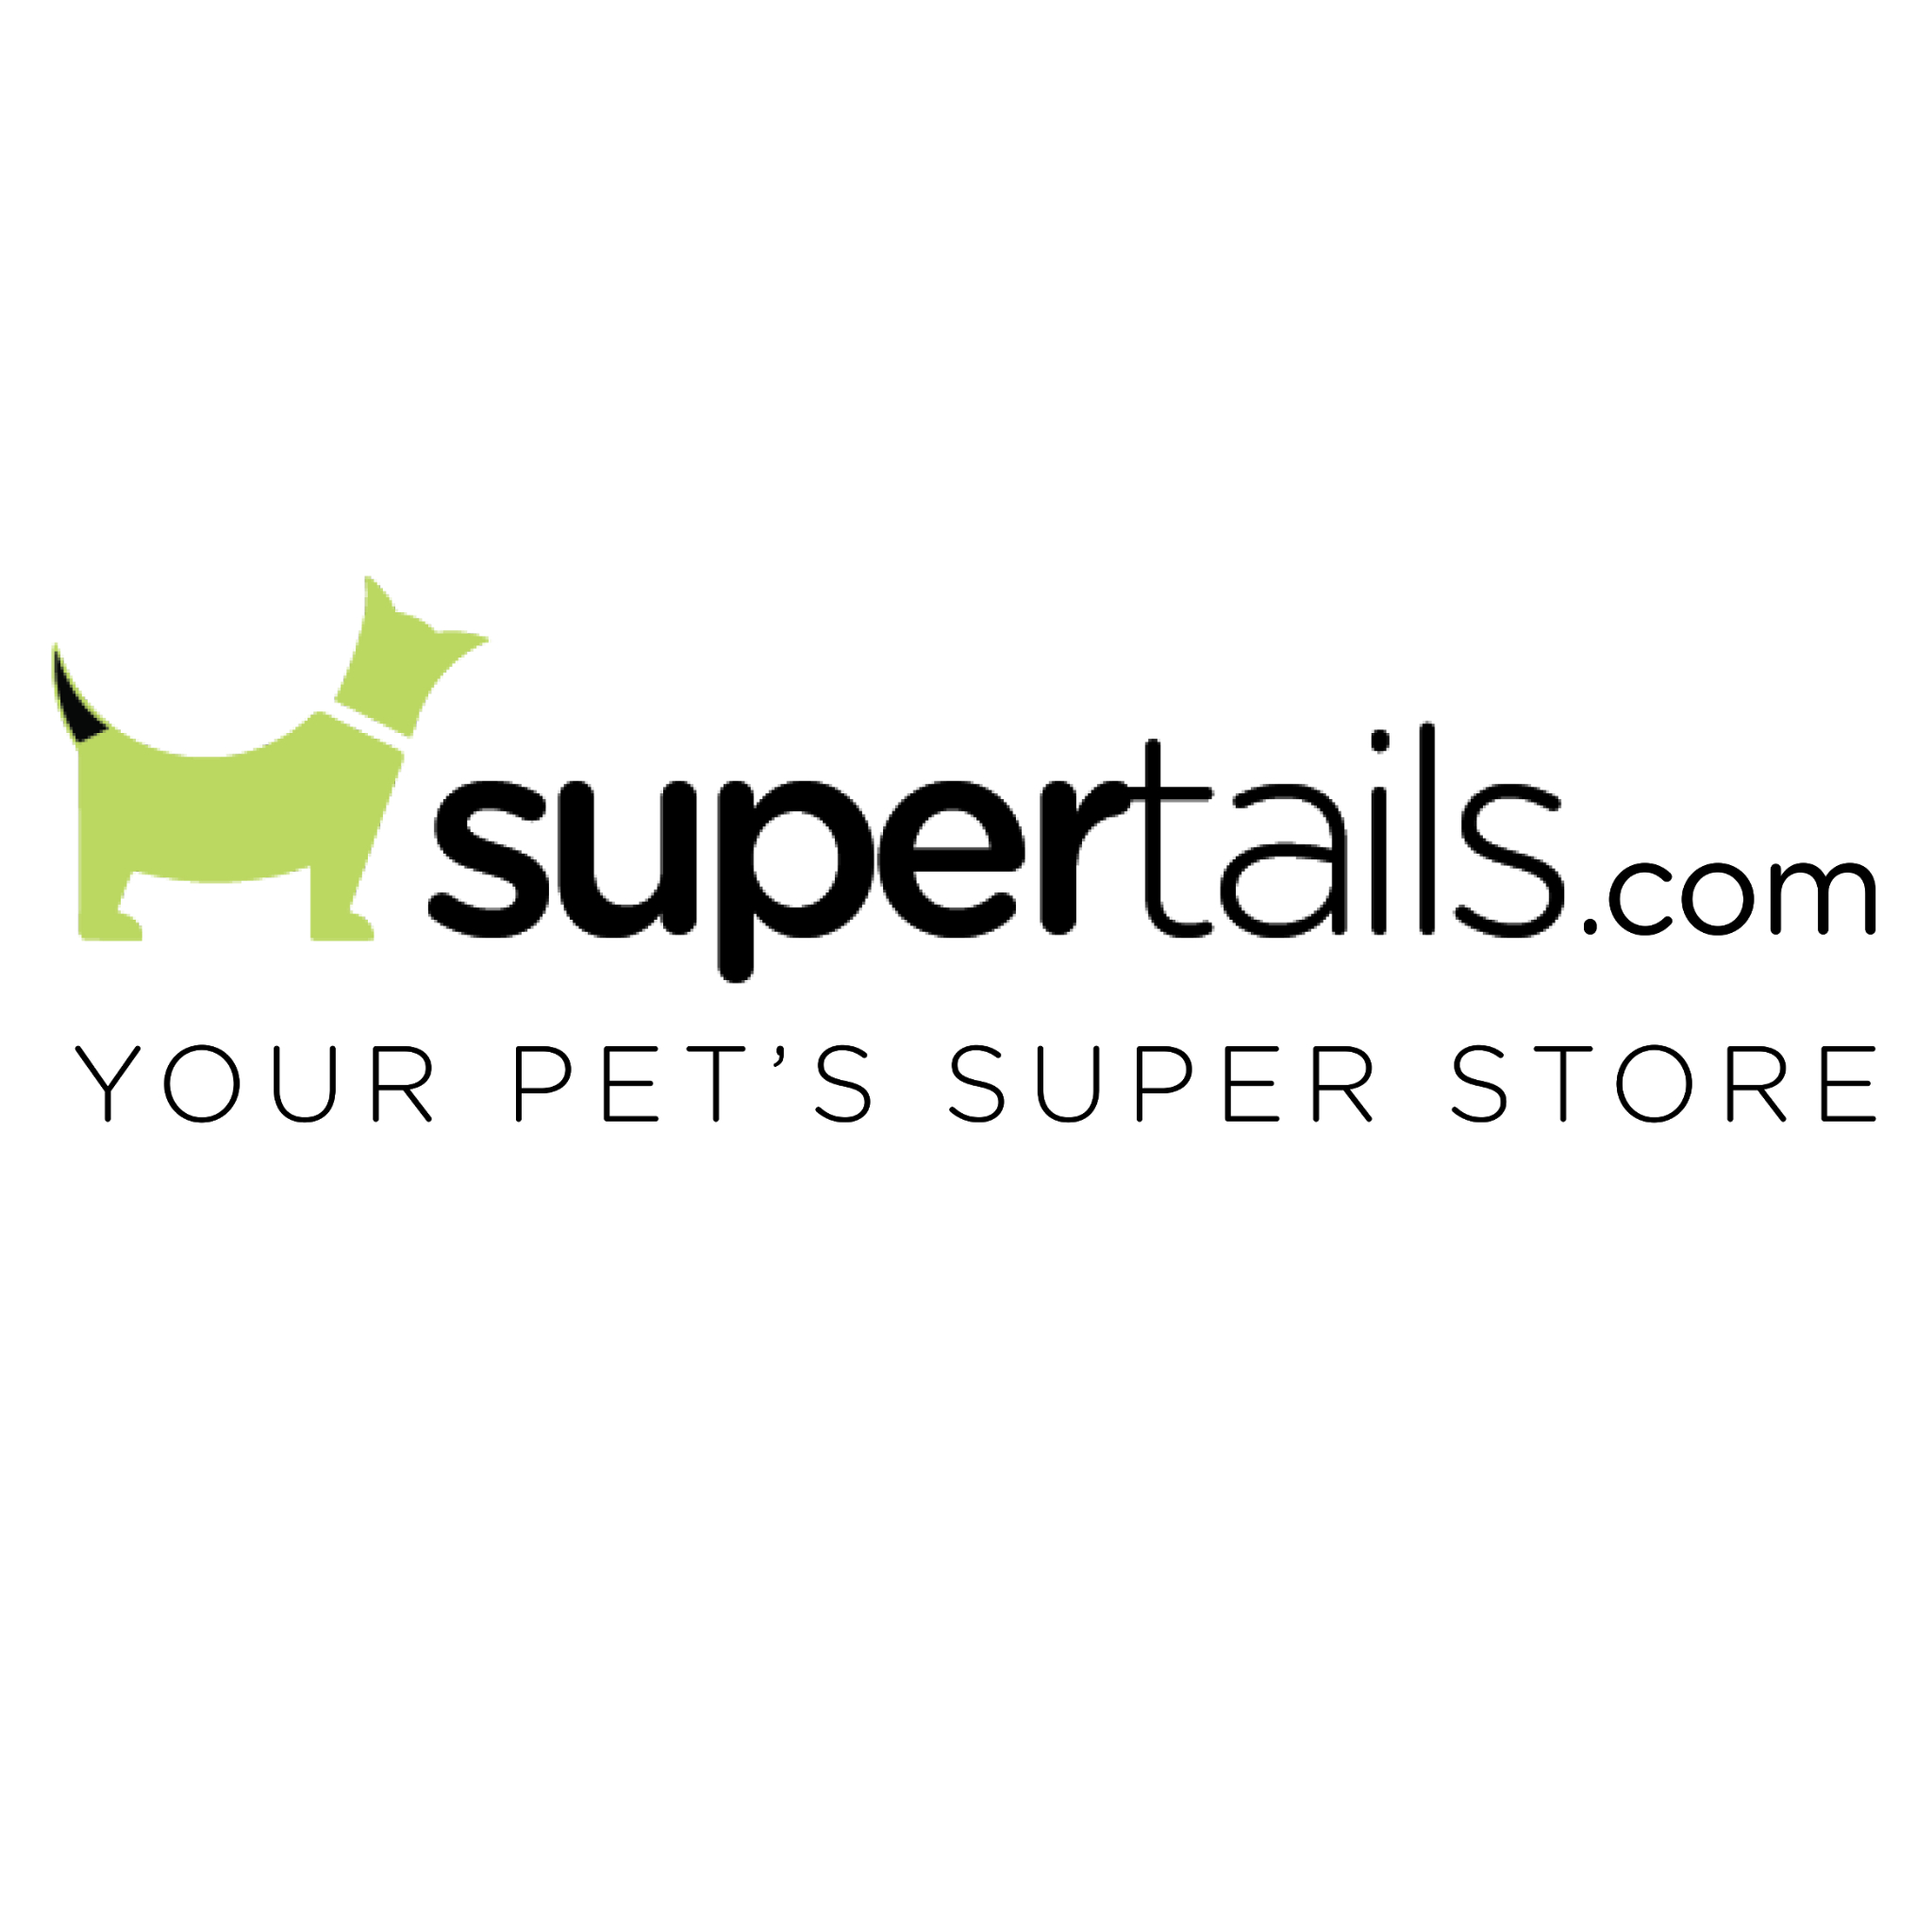 Supertails launches its new ad film, The Super- Store that comes to your door-thumnail